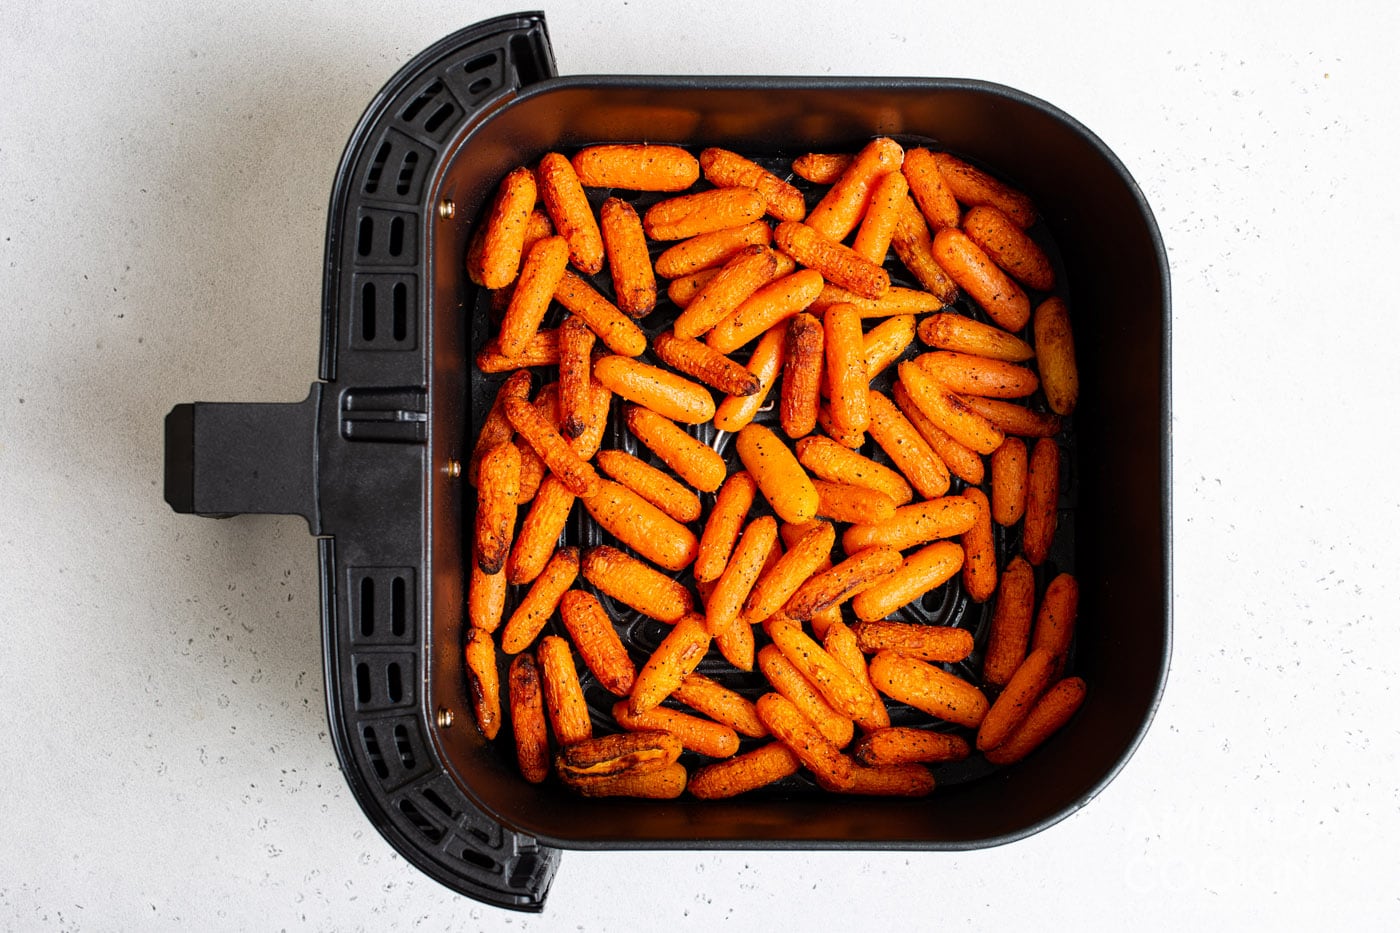 cooked carrots in an air fryer